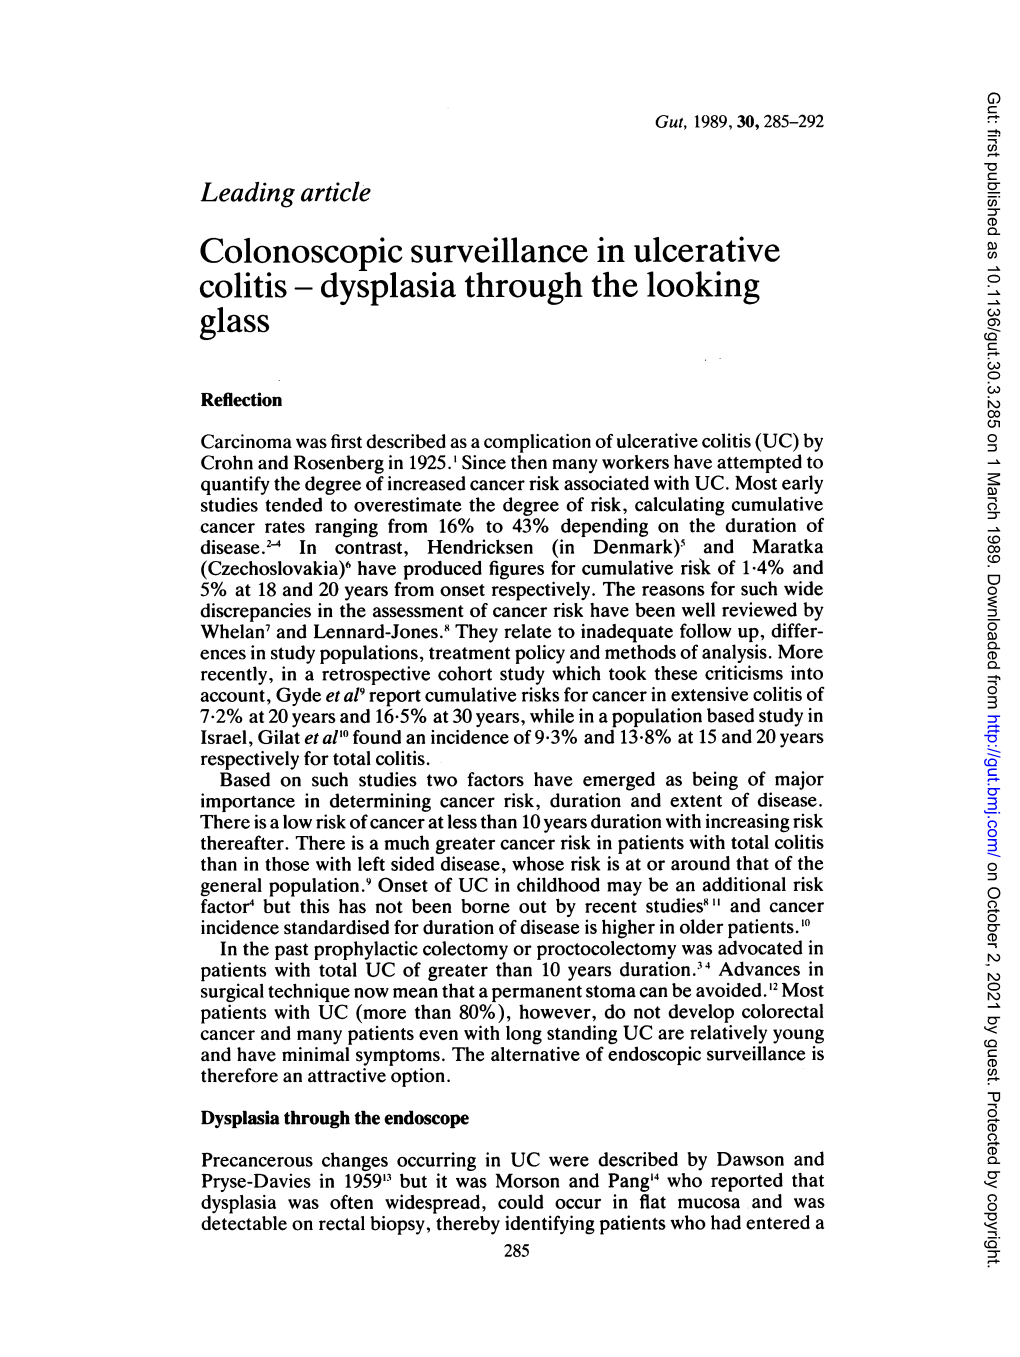 Colonoscopic Surveillance in Ulcerative Colitis - Dysplasia Through the Looking Glass